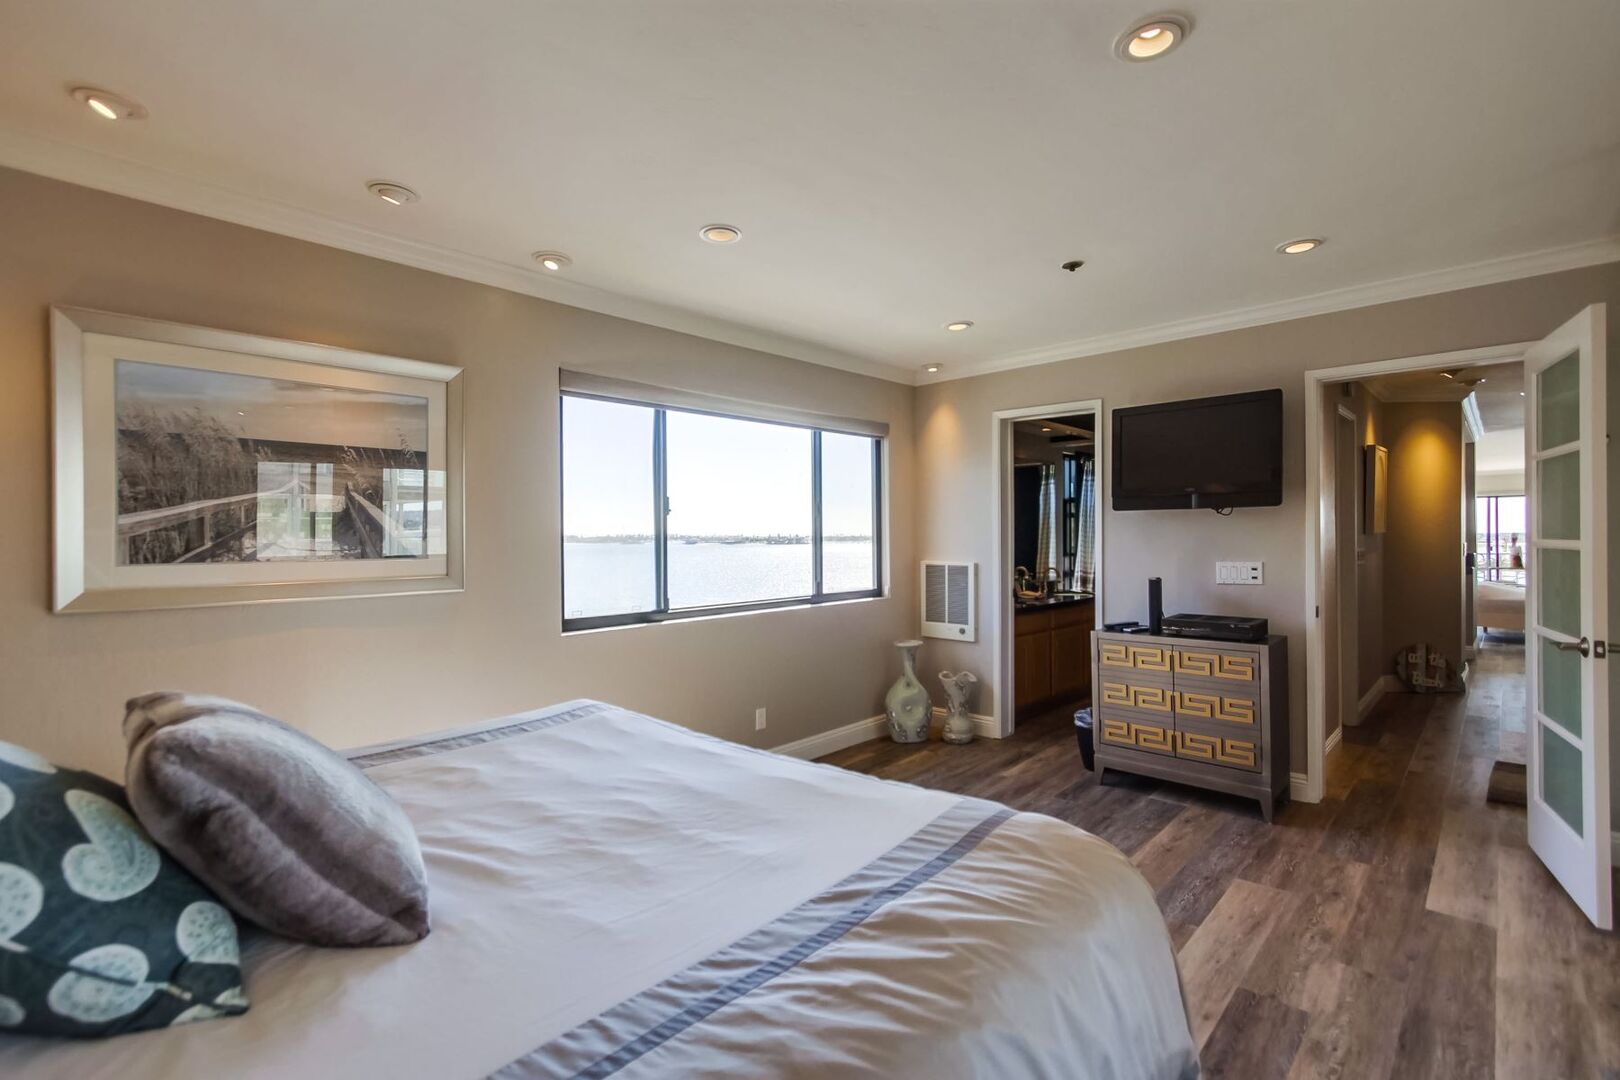 Master bedroom with king size Tempur-pedic mattress, recessed lighting, dresser storage, and Cable TV